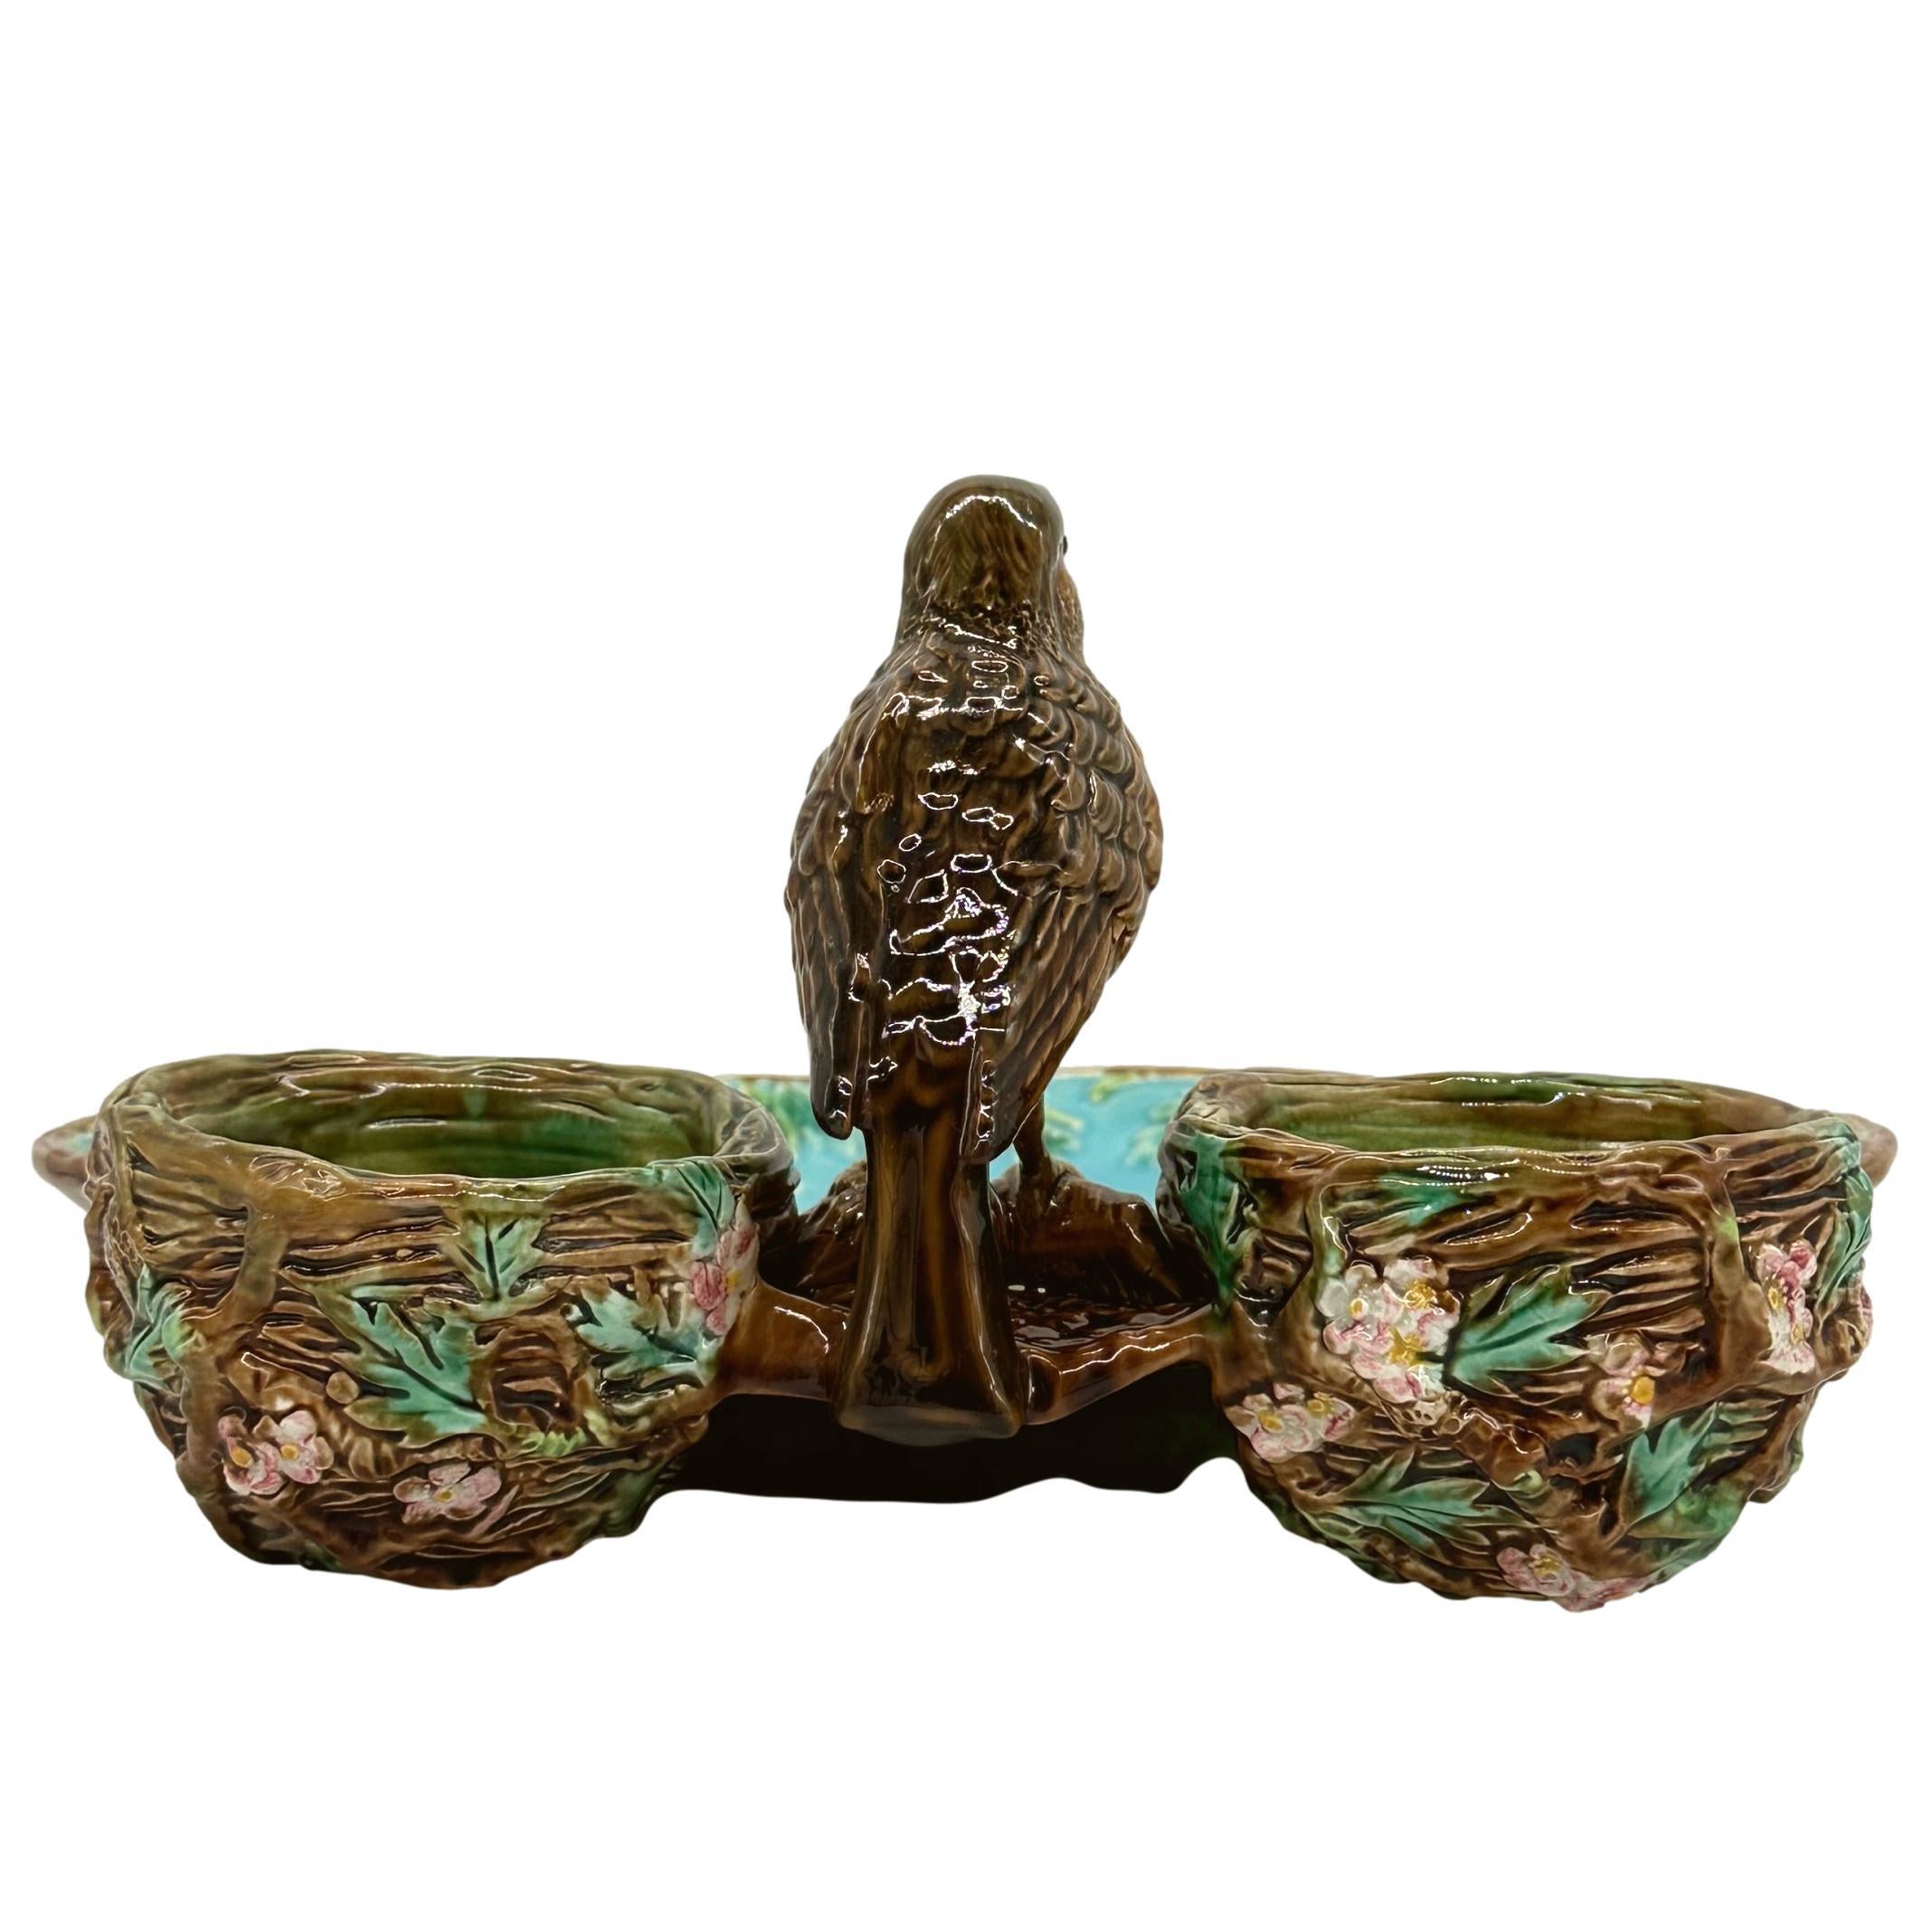 Victorian George Jones Majolica Strawberry Server Mounted by a Bird, English, circa 1870 For Sale